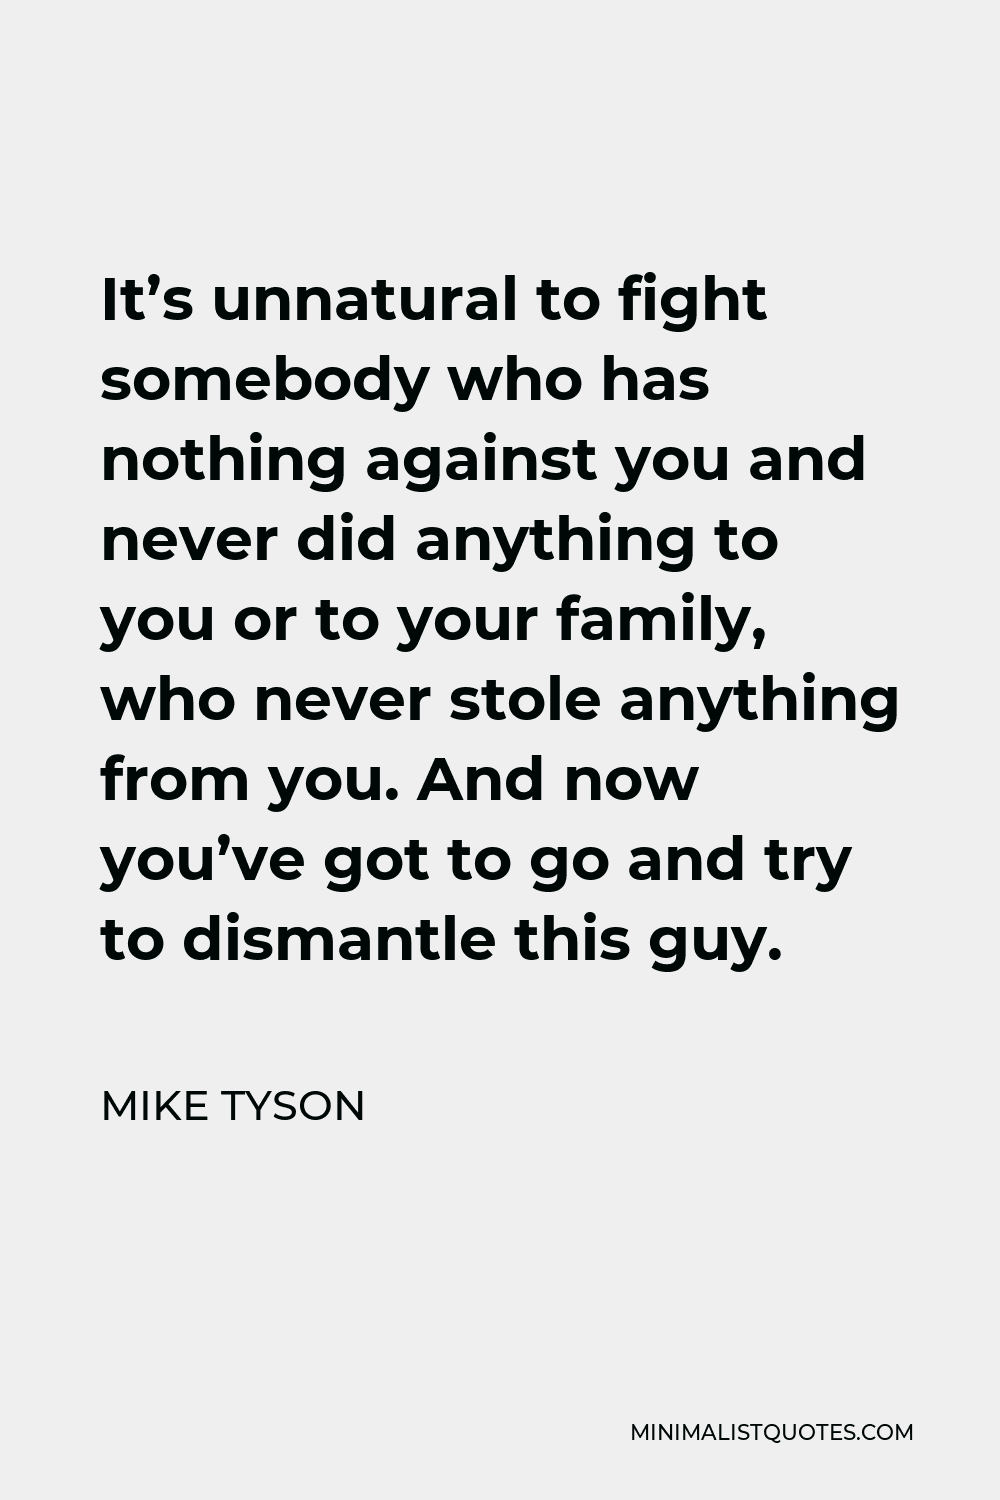 Mike Tyson Quote - It’s unnatural to fight somebody who has nothing against you and never did anything to you or to your family, who never stole anything from you. And now you’ve got to go and try to dismantle this guy.